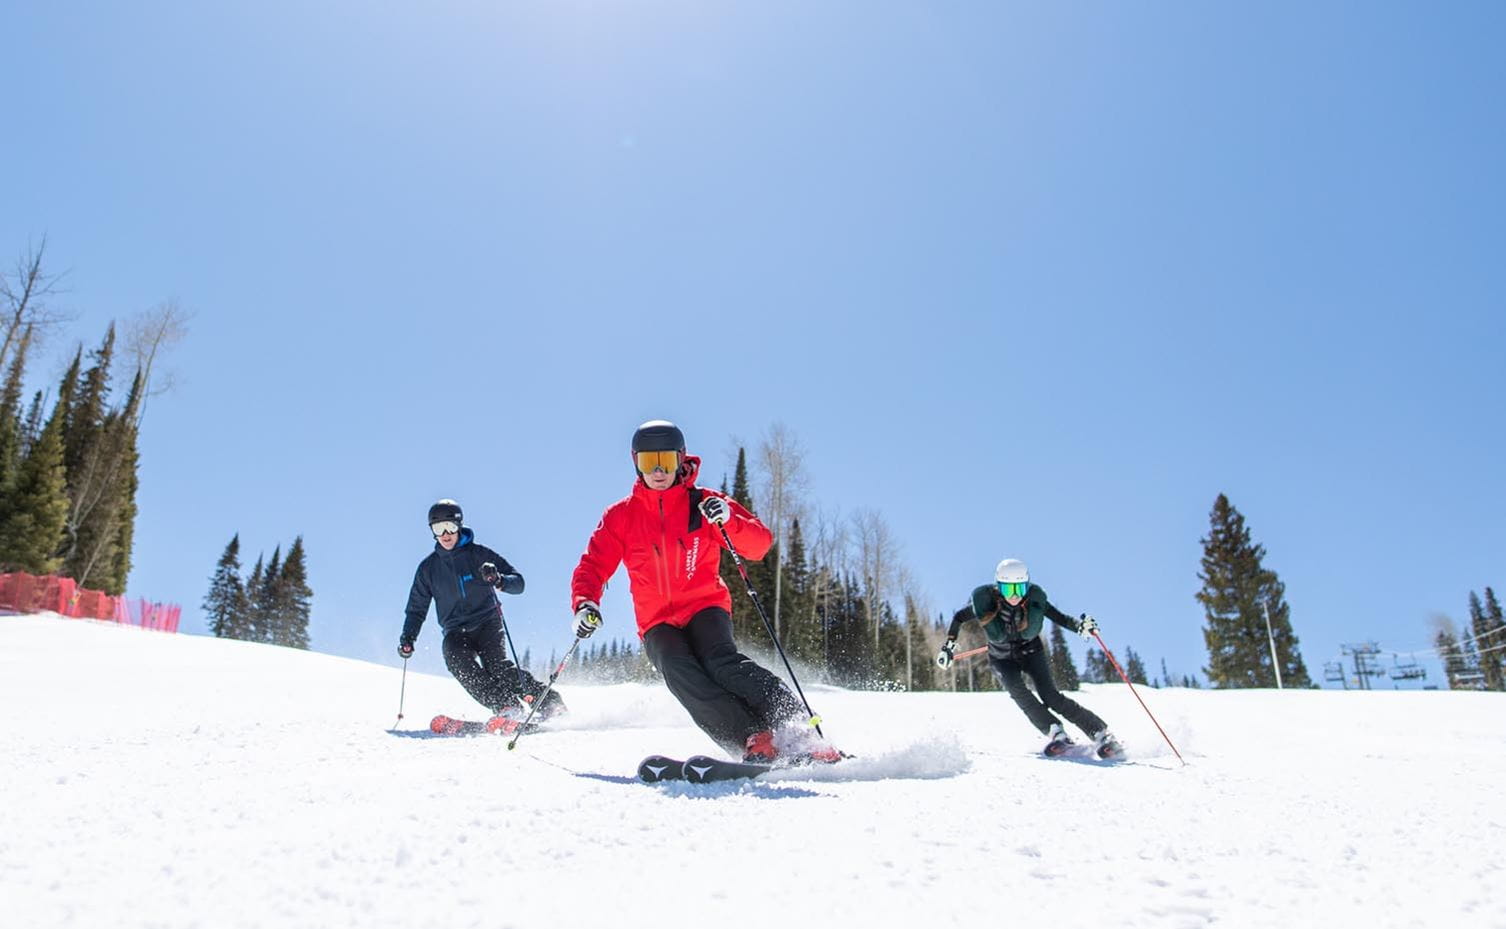 Two people learn to ski from an instructor at Snowmass